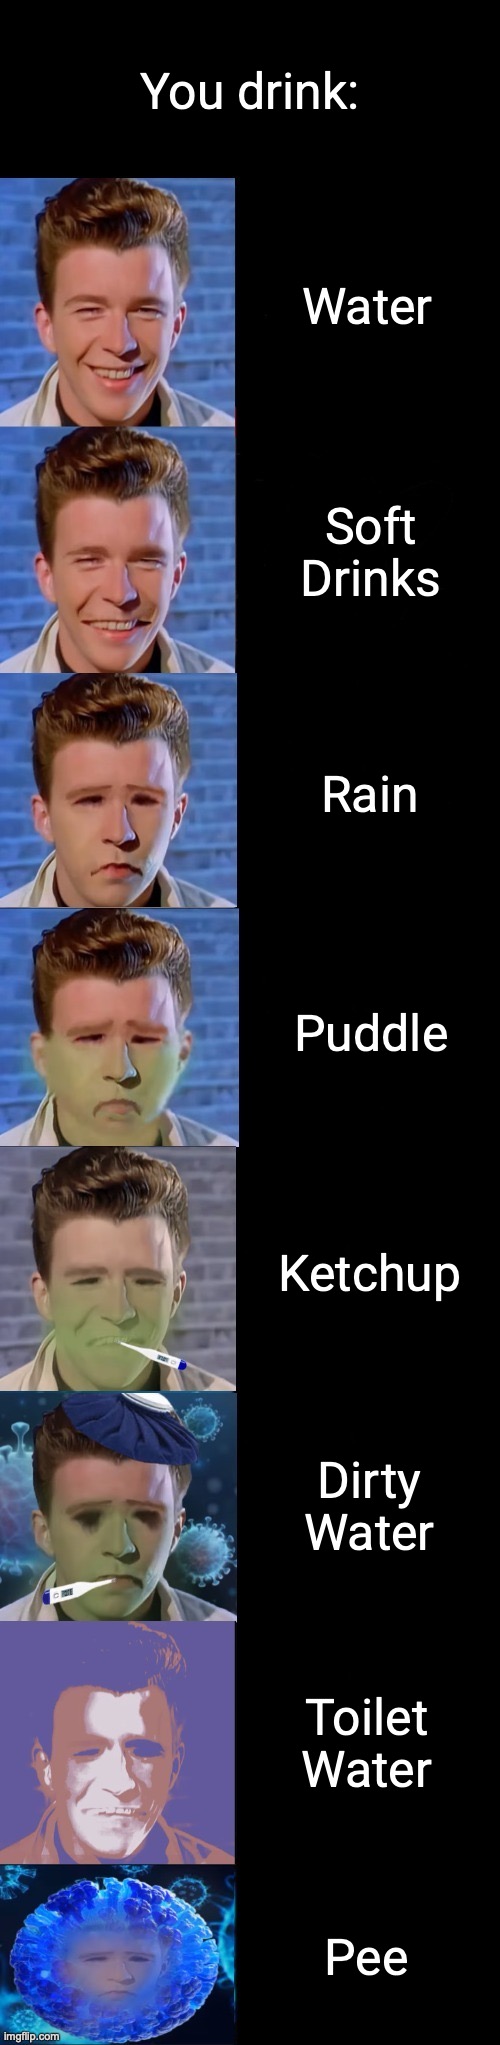 Rick Astley Becoming Sick |  You drink:; Water; Soft Drinks; Rain; Puddle; Ketchup; Dirty Water; Toilet Water; Pee | image tagged in rick astley becoming sick,sick,vomits,rick astley | made w/ Imgflip meme maker